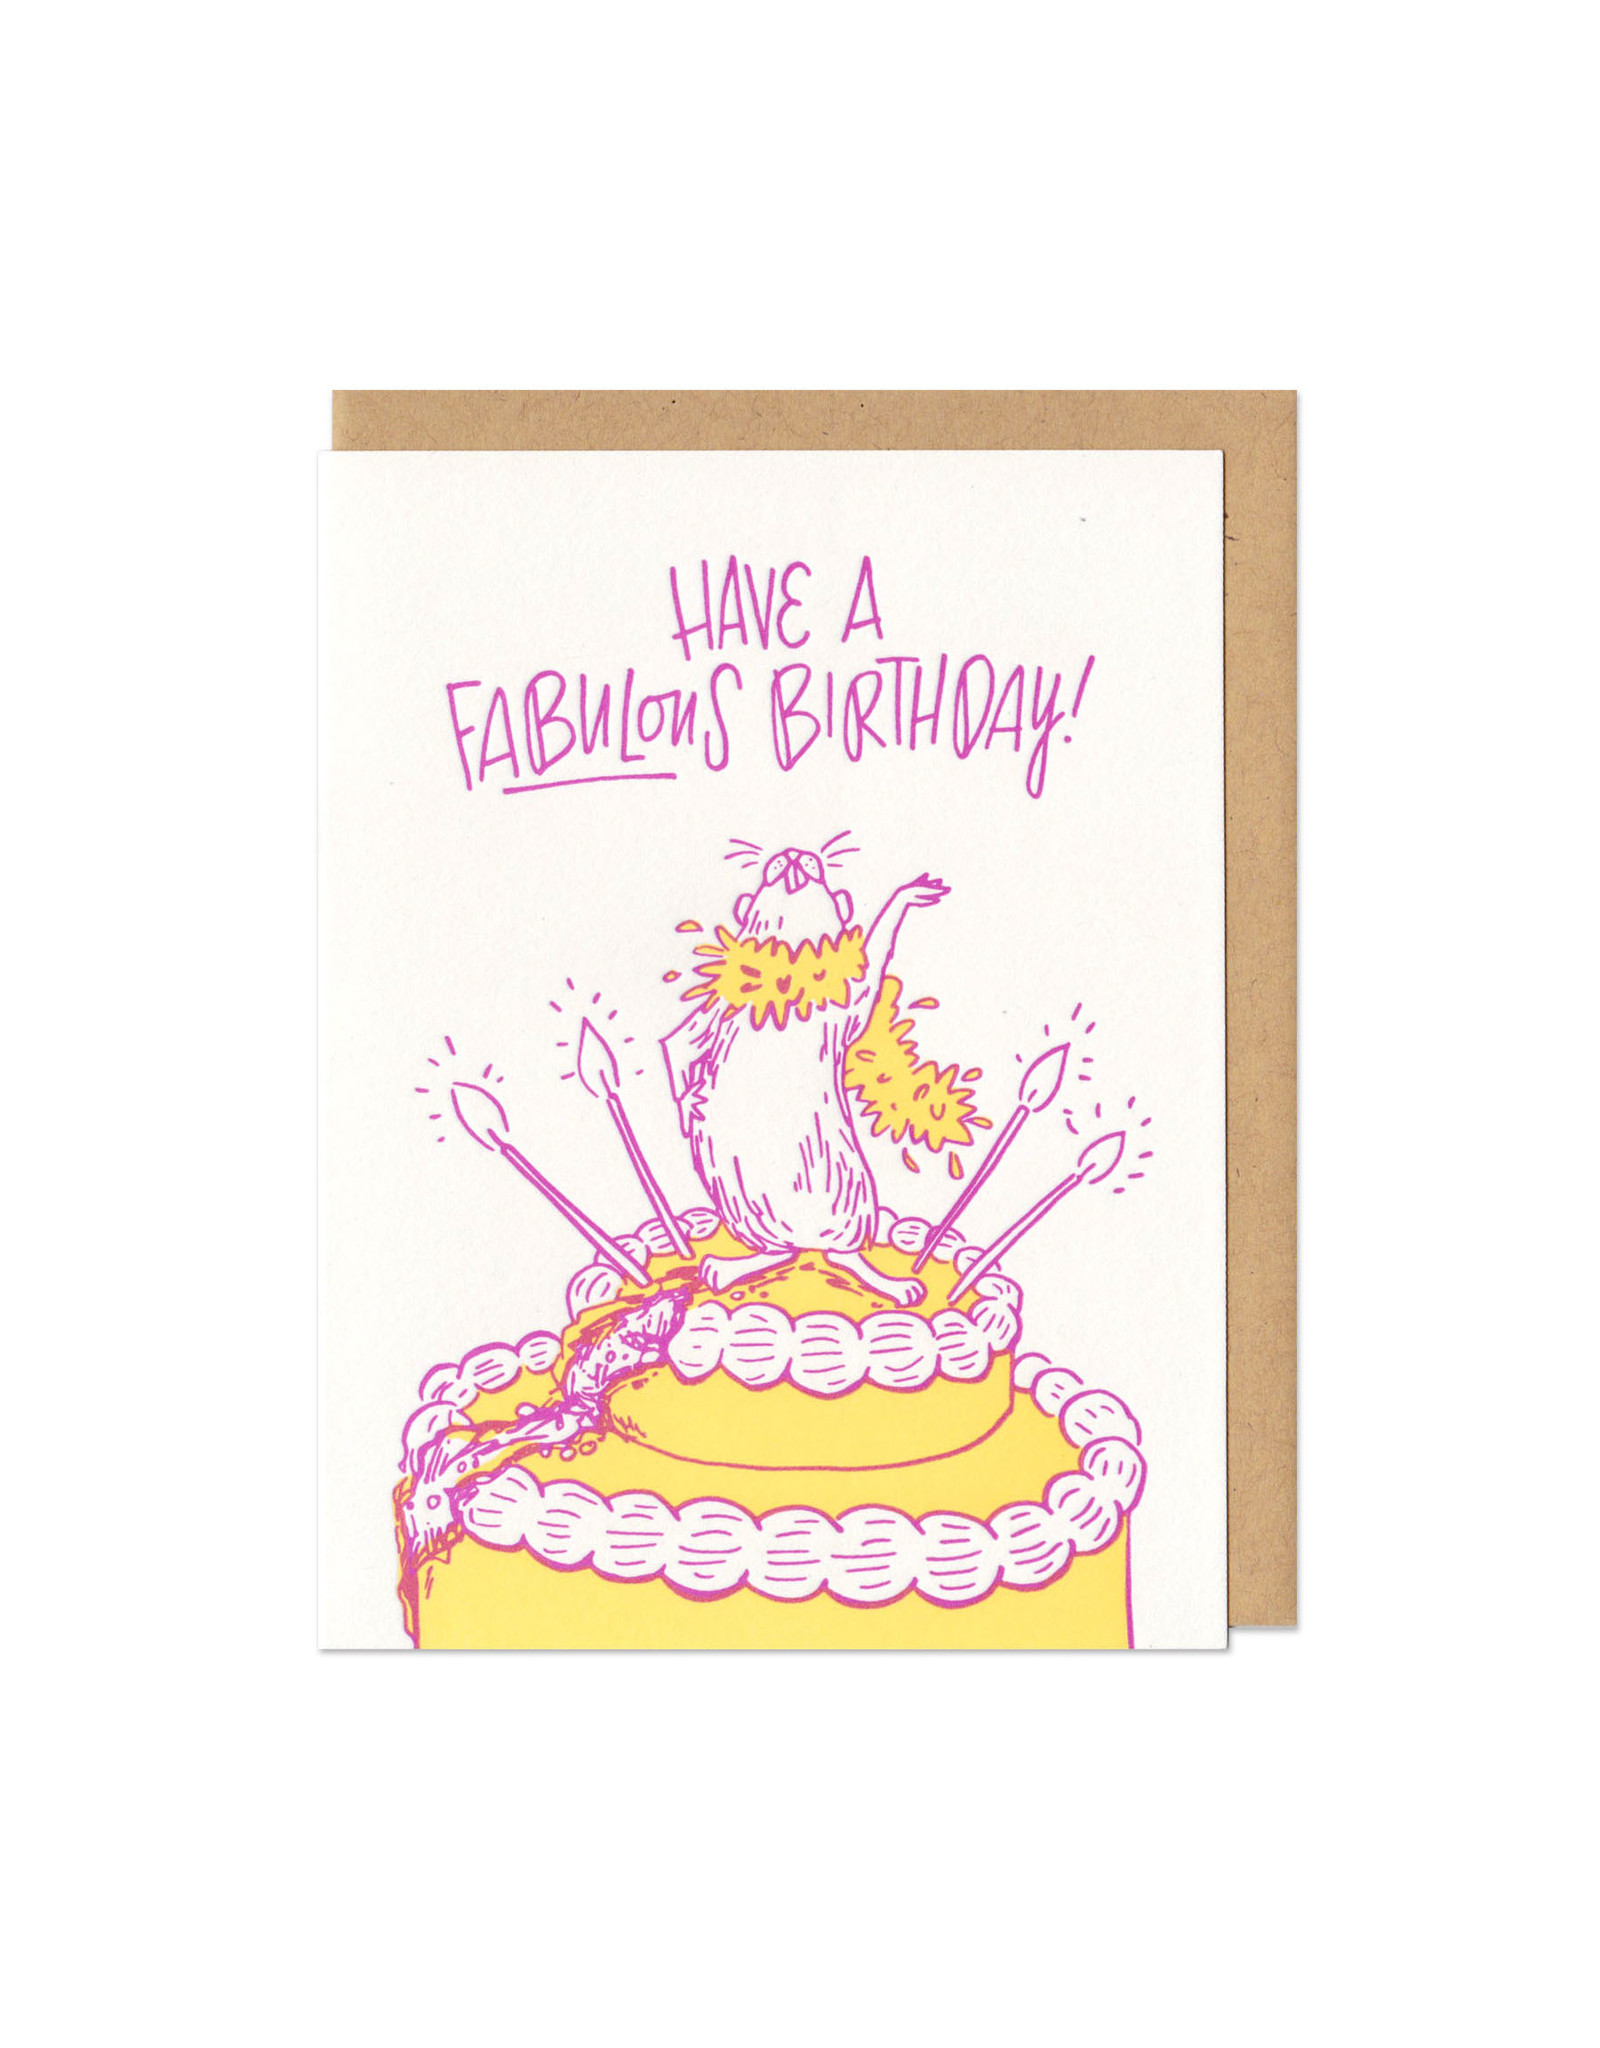 Have A Fabulous Birthday Hamster (Light) Greeting Card*